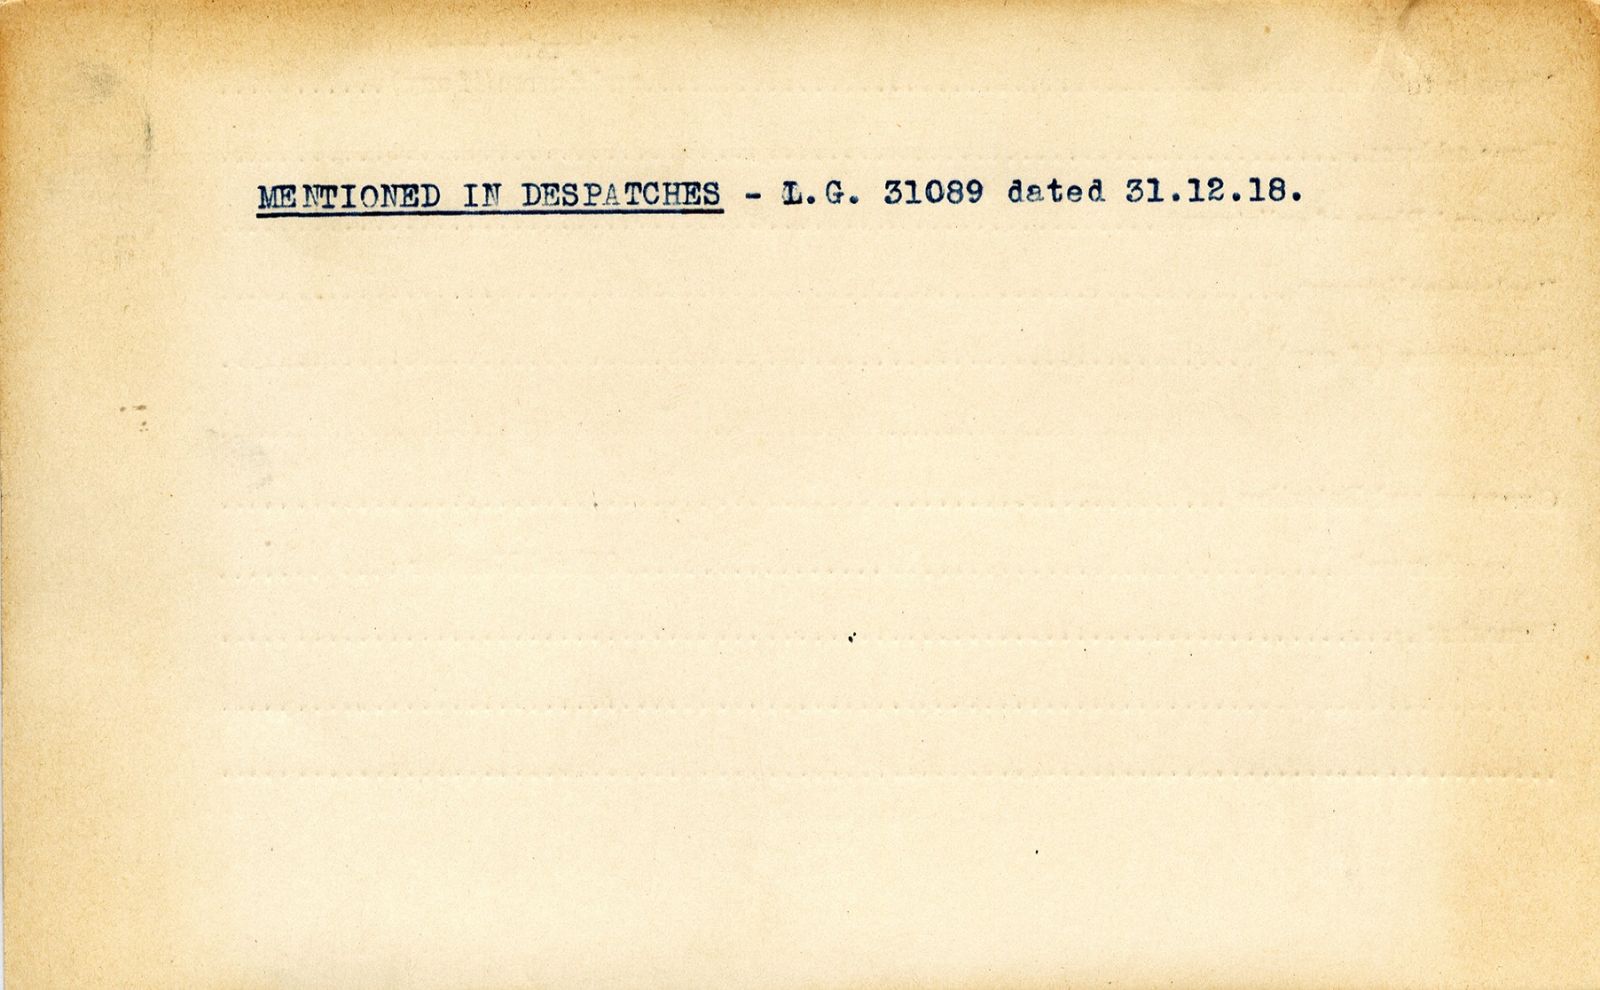 University Military Service Record of Wilson, Back Page